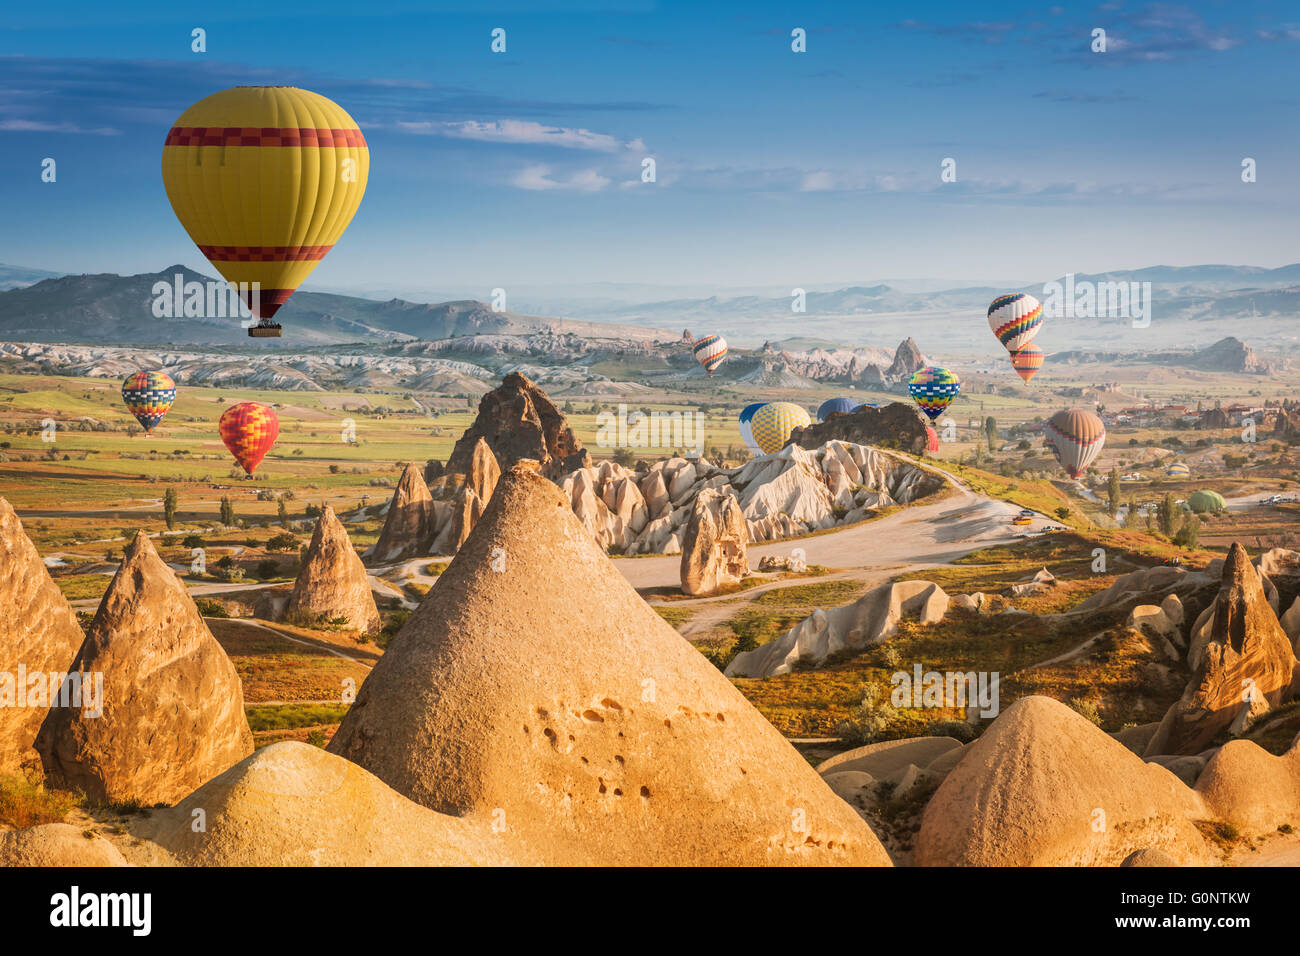 Hot air balloons flying over a field of poppies and rock landscape at Cappadocia, Turkey Stock Photo